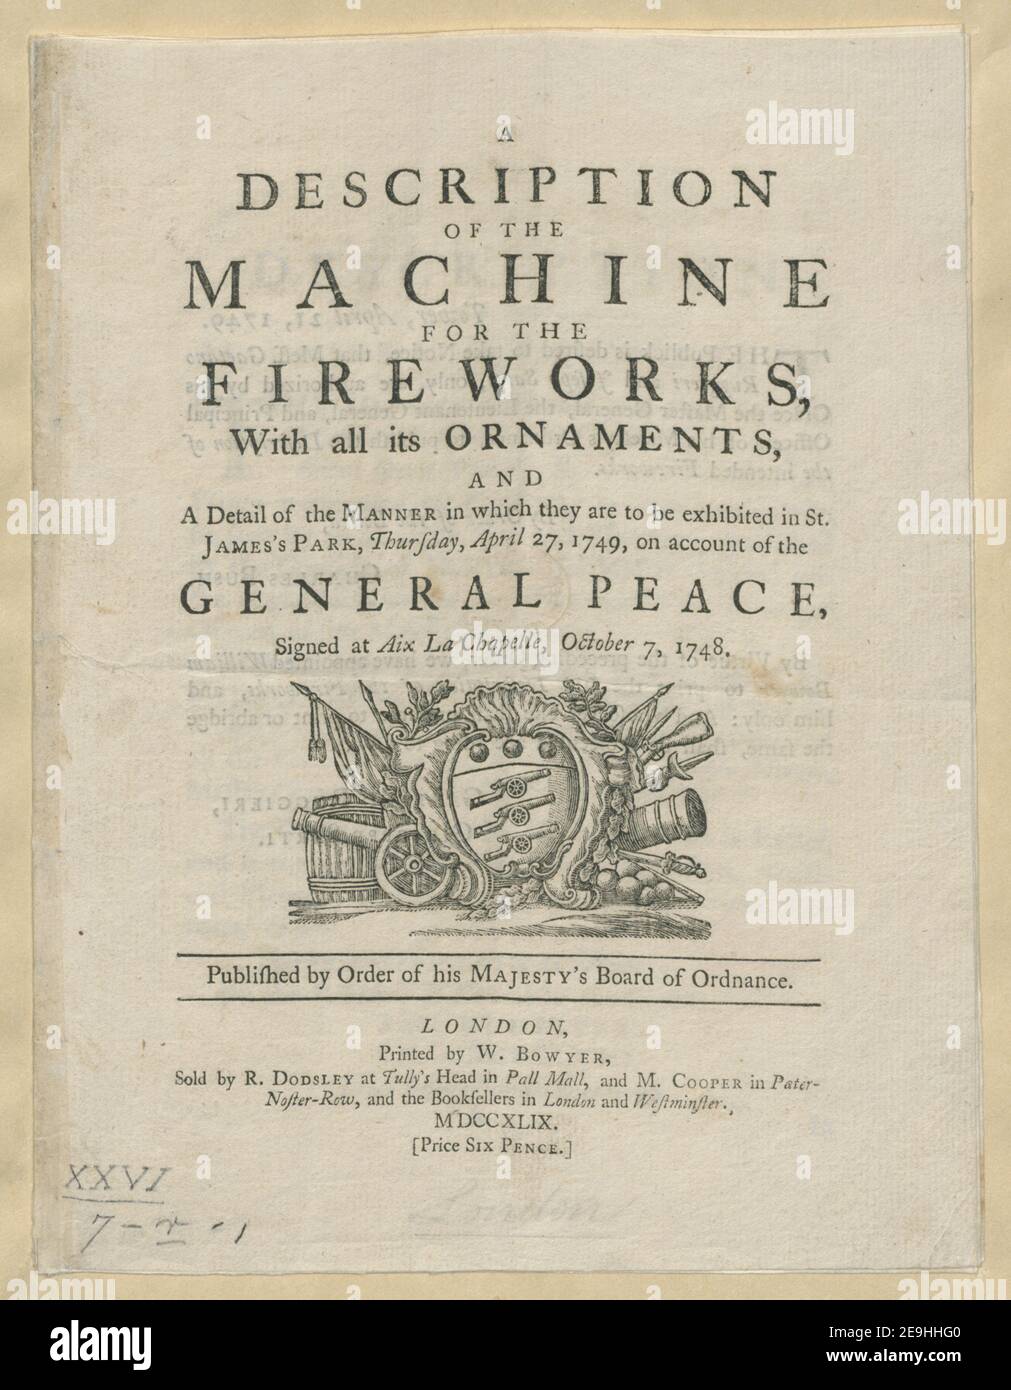 A DESCRIPTION OF THE MACHINE FOR THE FIREWORKS, With all its ORNAMENTS,  Visual Material information:  Title: A DESCRIPTION OF THE MACHINE FOR THE FIREWORKS, With all its ORNAMENTS, ; 26.7.r.1. Place of publication: [London] Publisher: Published by Order of his Majesty's Board of Ordnance. LONDON. Printed by W. BOWYER, Sold by R. DODSLEY at Tully's Head in Pall Mall, and M. COOPER in Pater-Noster-Row, and the Booksellers in London and Westminster. MDDCCXLIX. (Price SIX PENCE)., Date of publication: [1748]  Item type: 1 pamphlet Medium: woodcut and letterpr Stock Photo